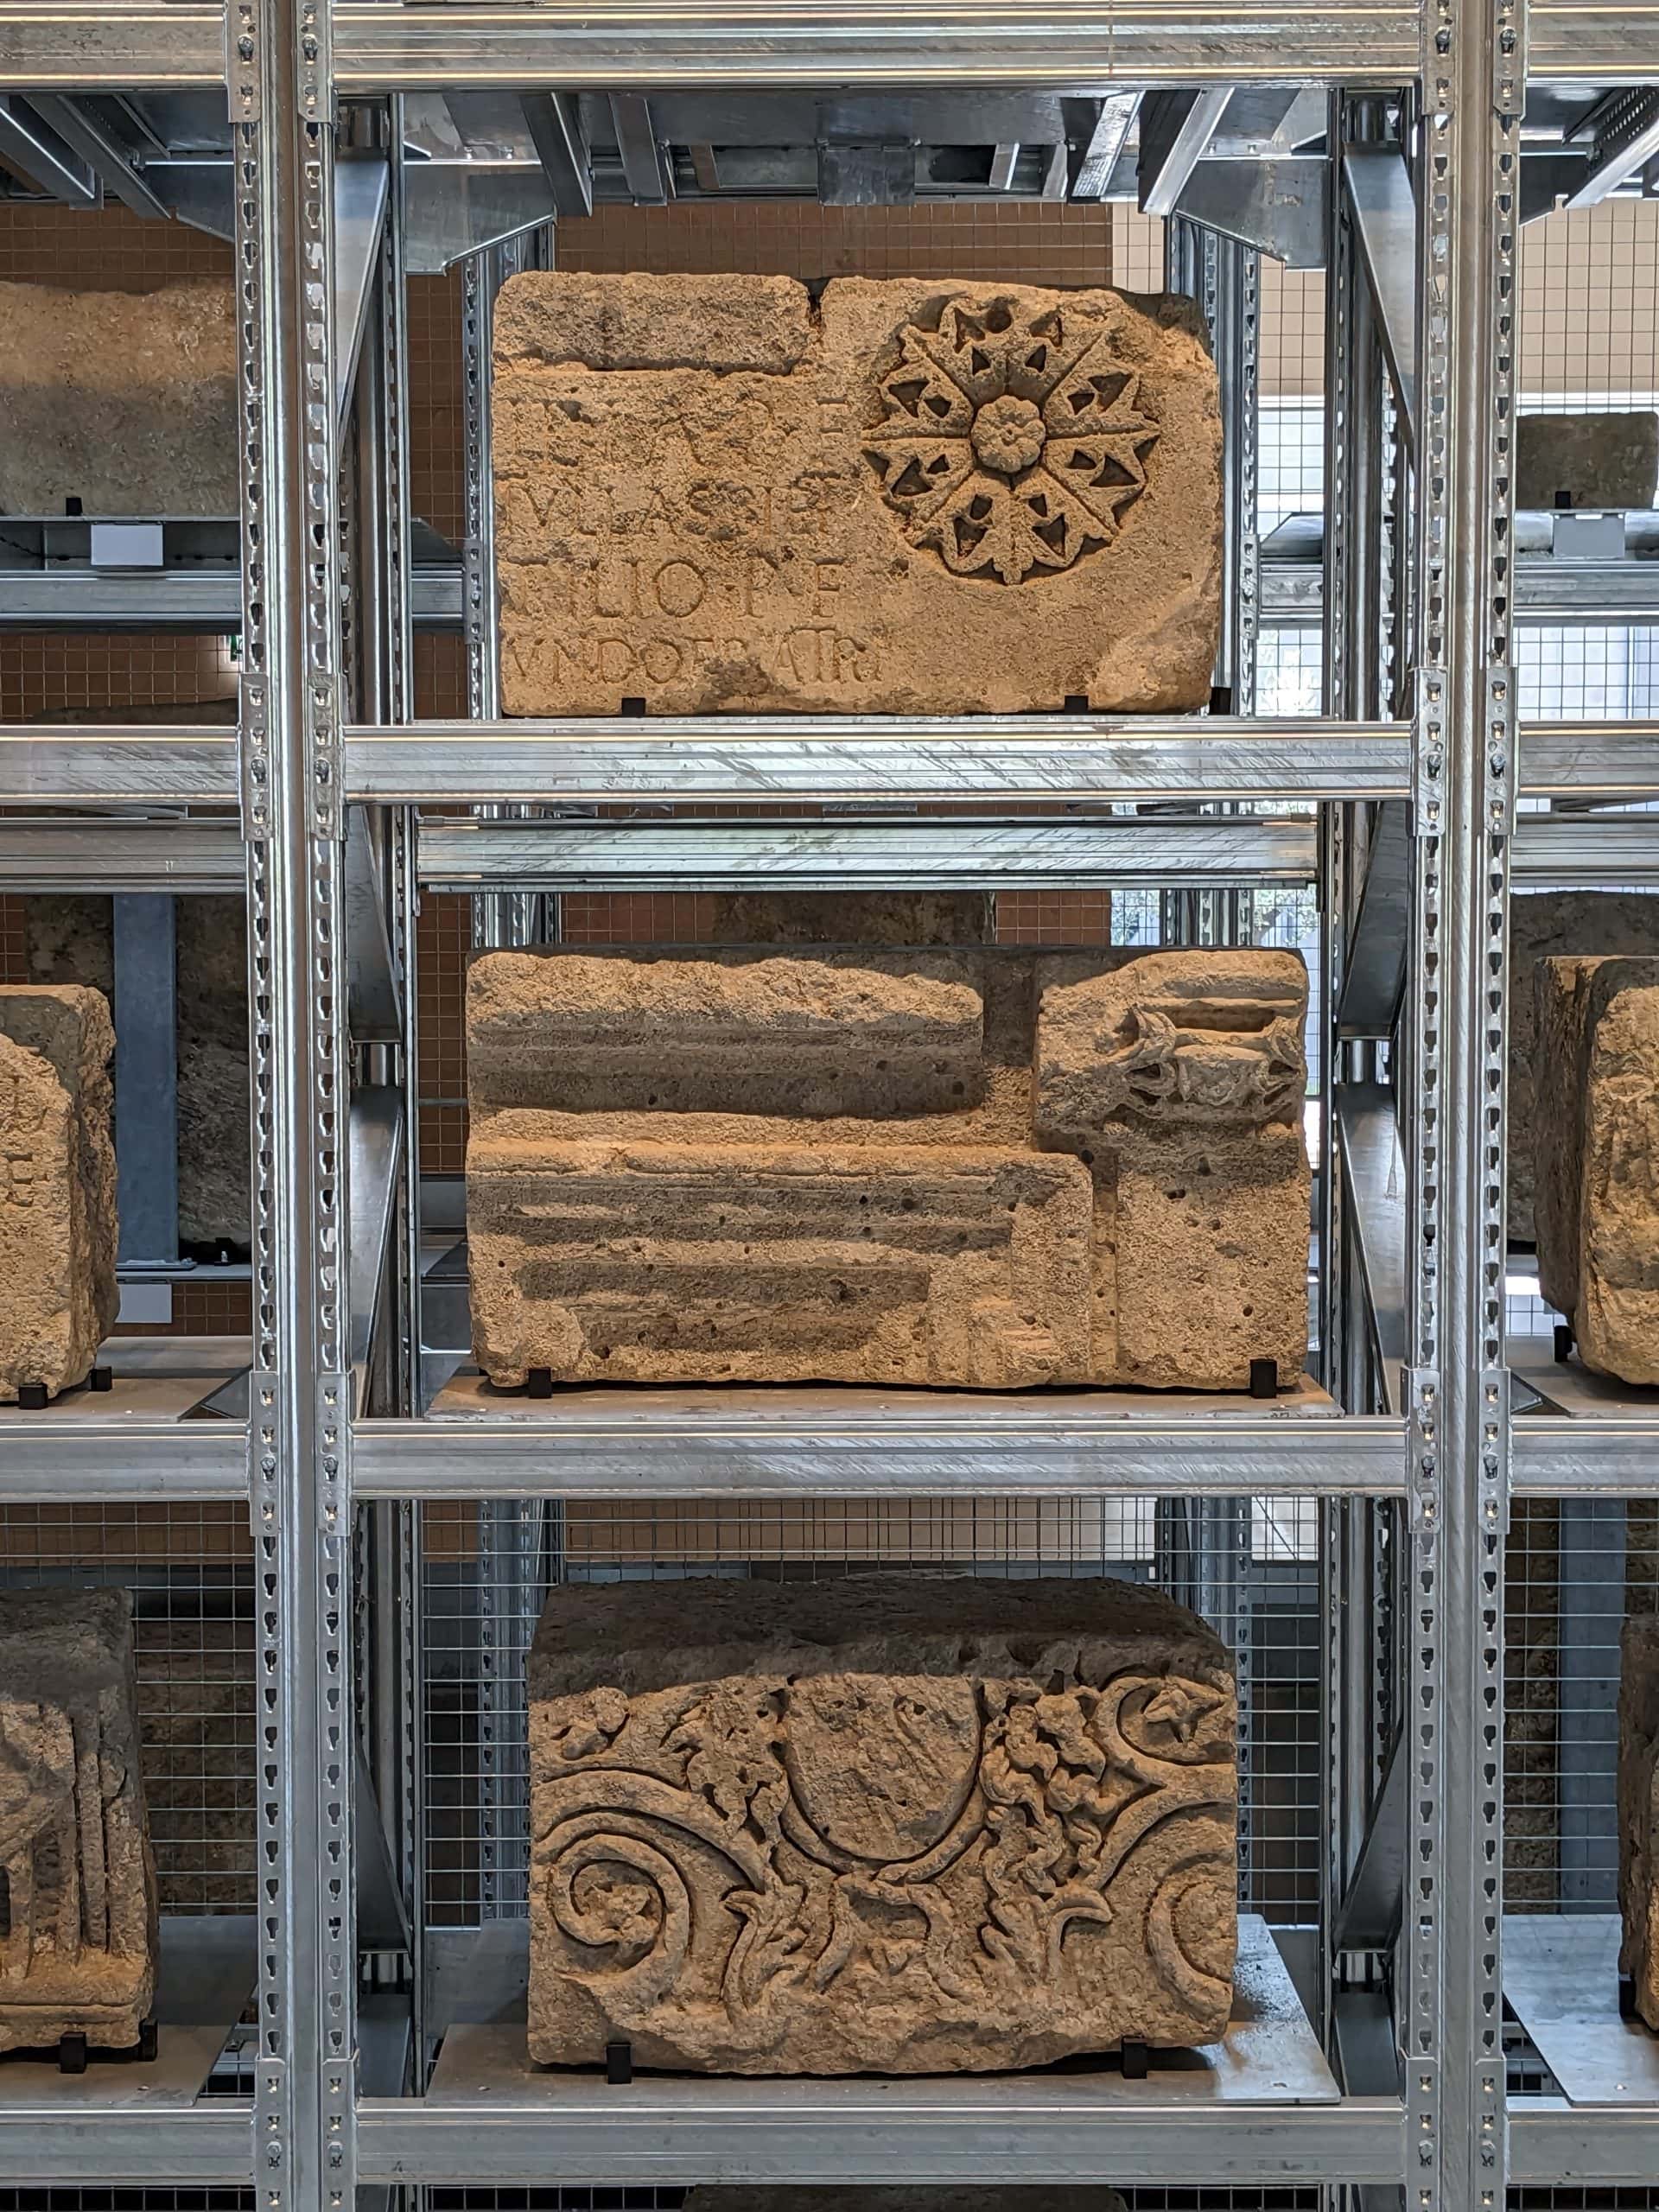 A close-up of the "lapidary wall" at Narbo Via, comprising many carved stones held on metal shelves.